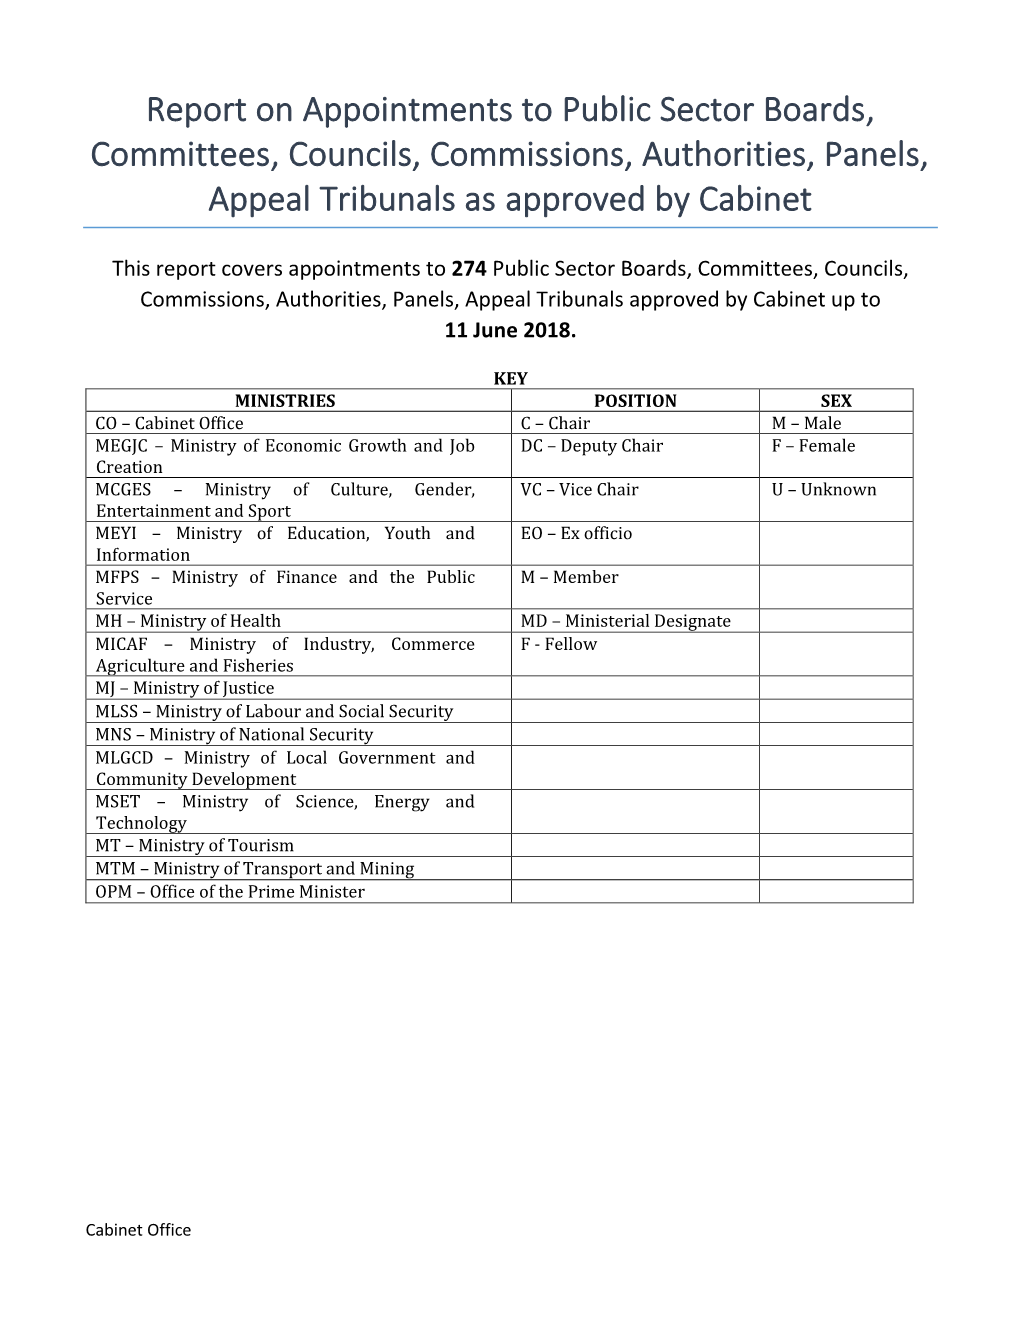 Report on Appointments to Public Sector Boards, Committees, Councils, Commissions, Authorities, Panels, Appeal Tribunals As Approved by Cabinet